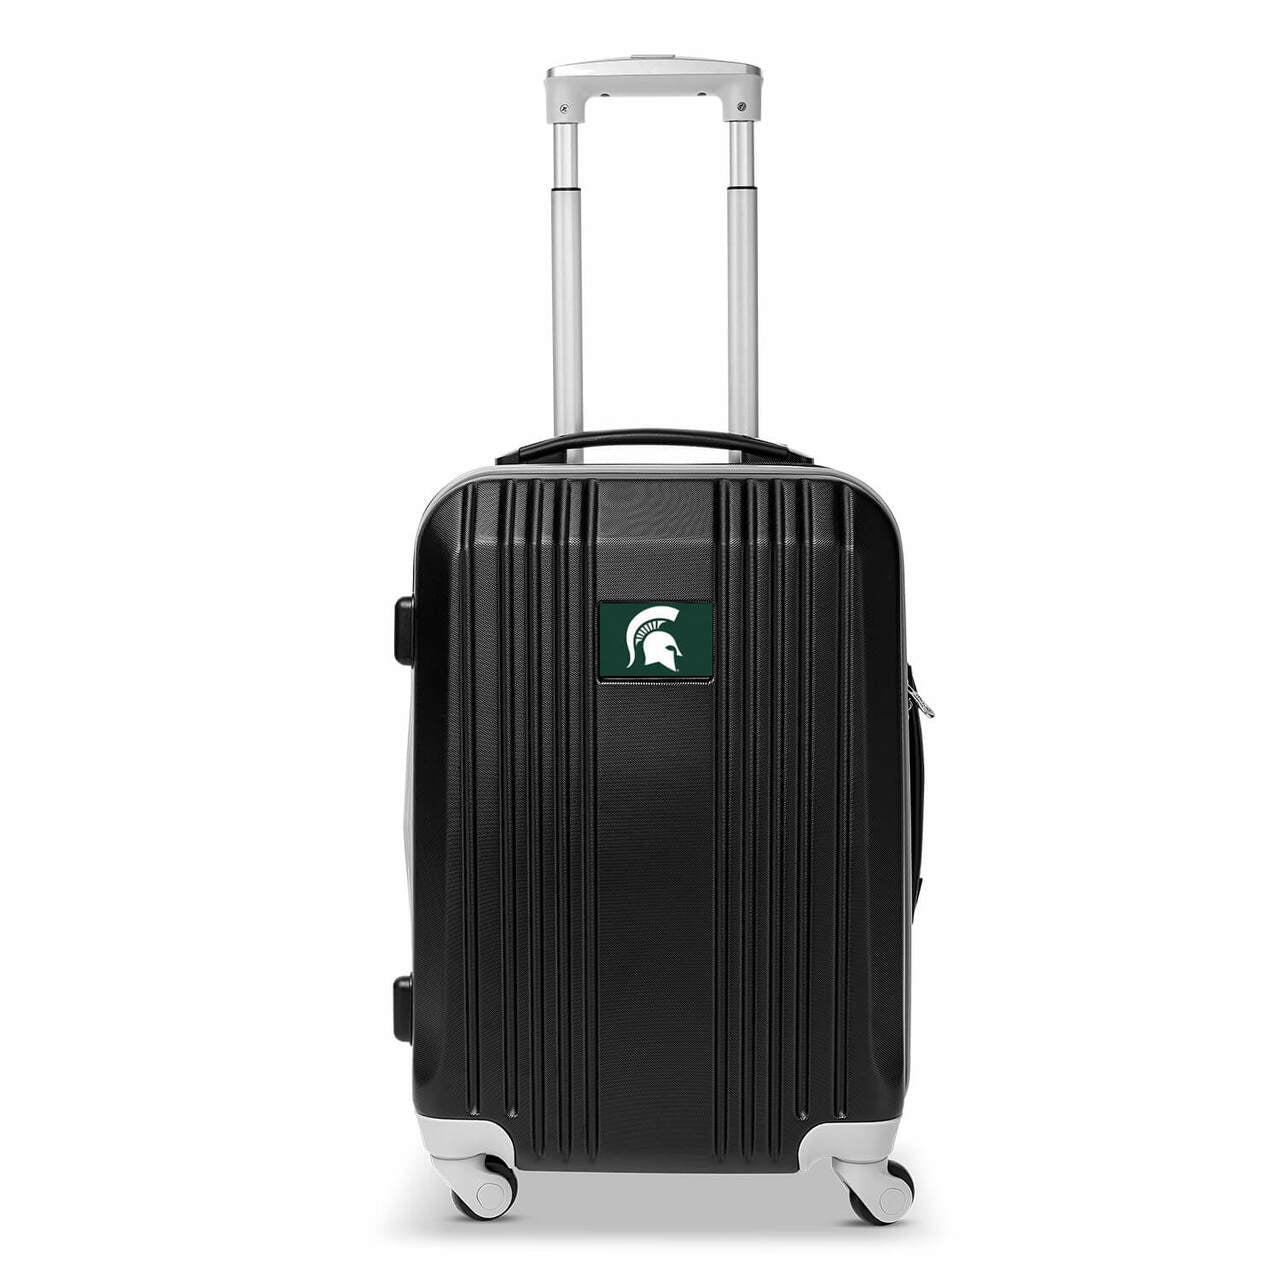 Michigan State Carry On Spinner Luggage | Michigan State Hardcase Two-Tone Luggage Carry-on Spinner in Black